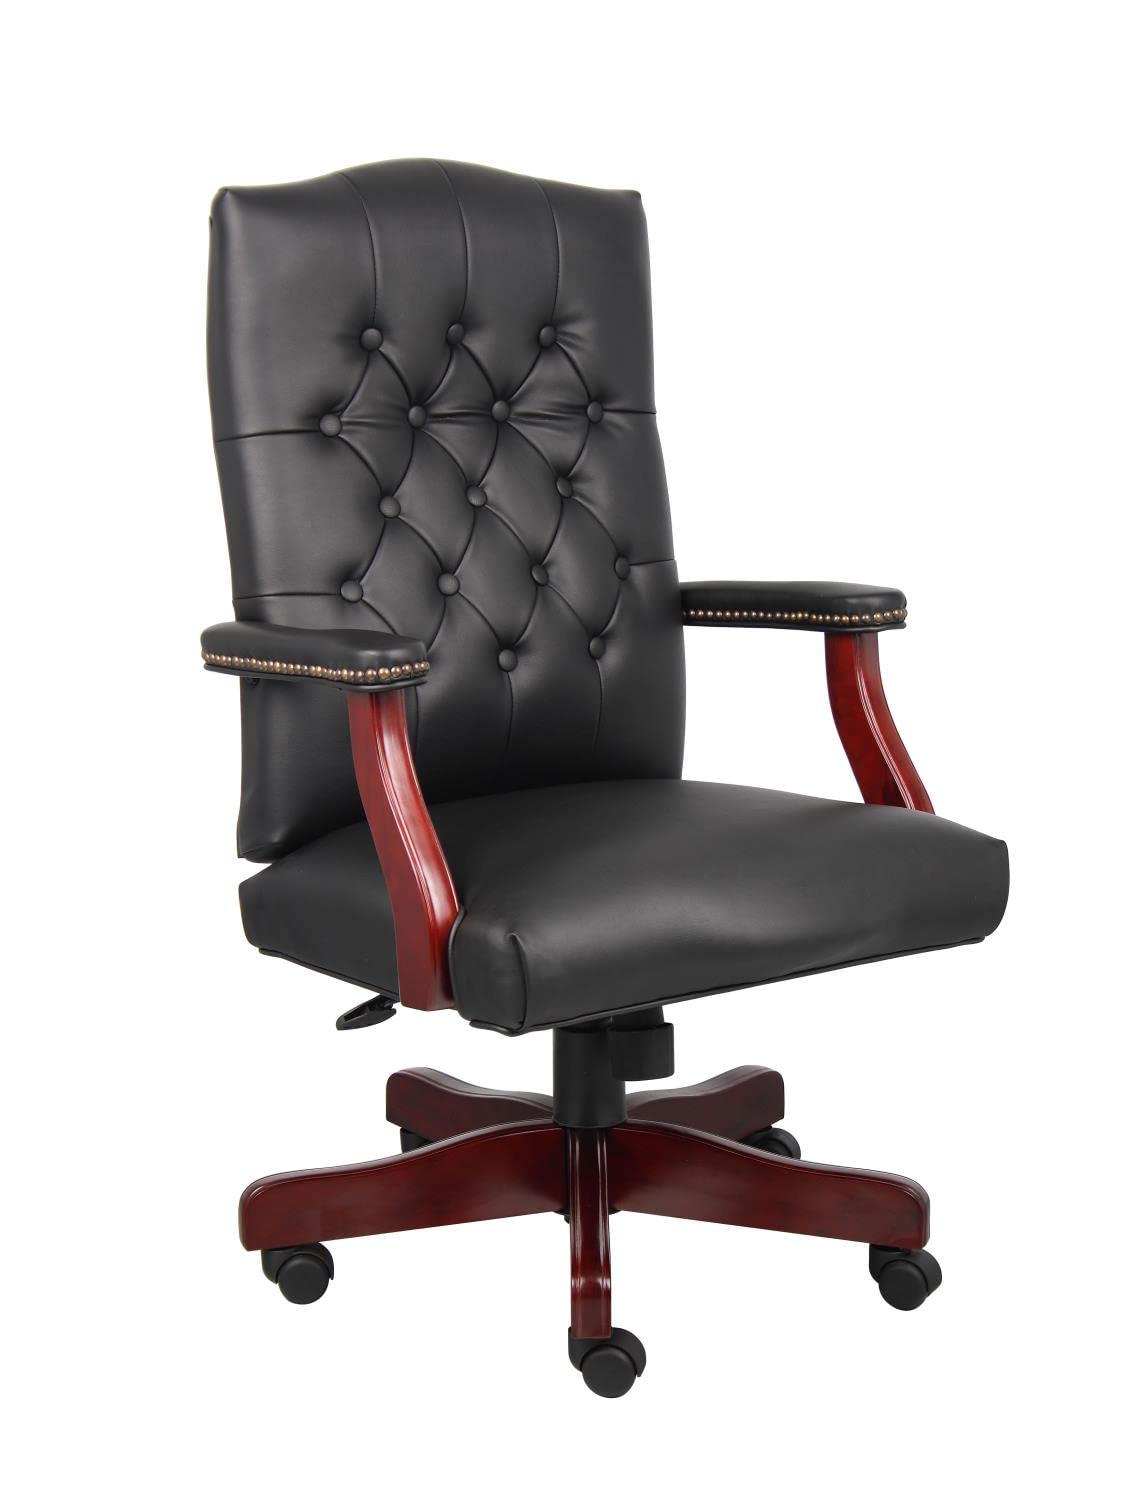 Boss Office Products Office Products Classic Executive Caressoft Chair with Mahogany Finish in Black